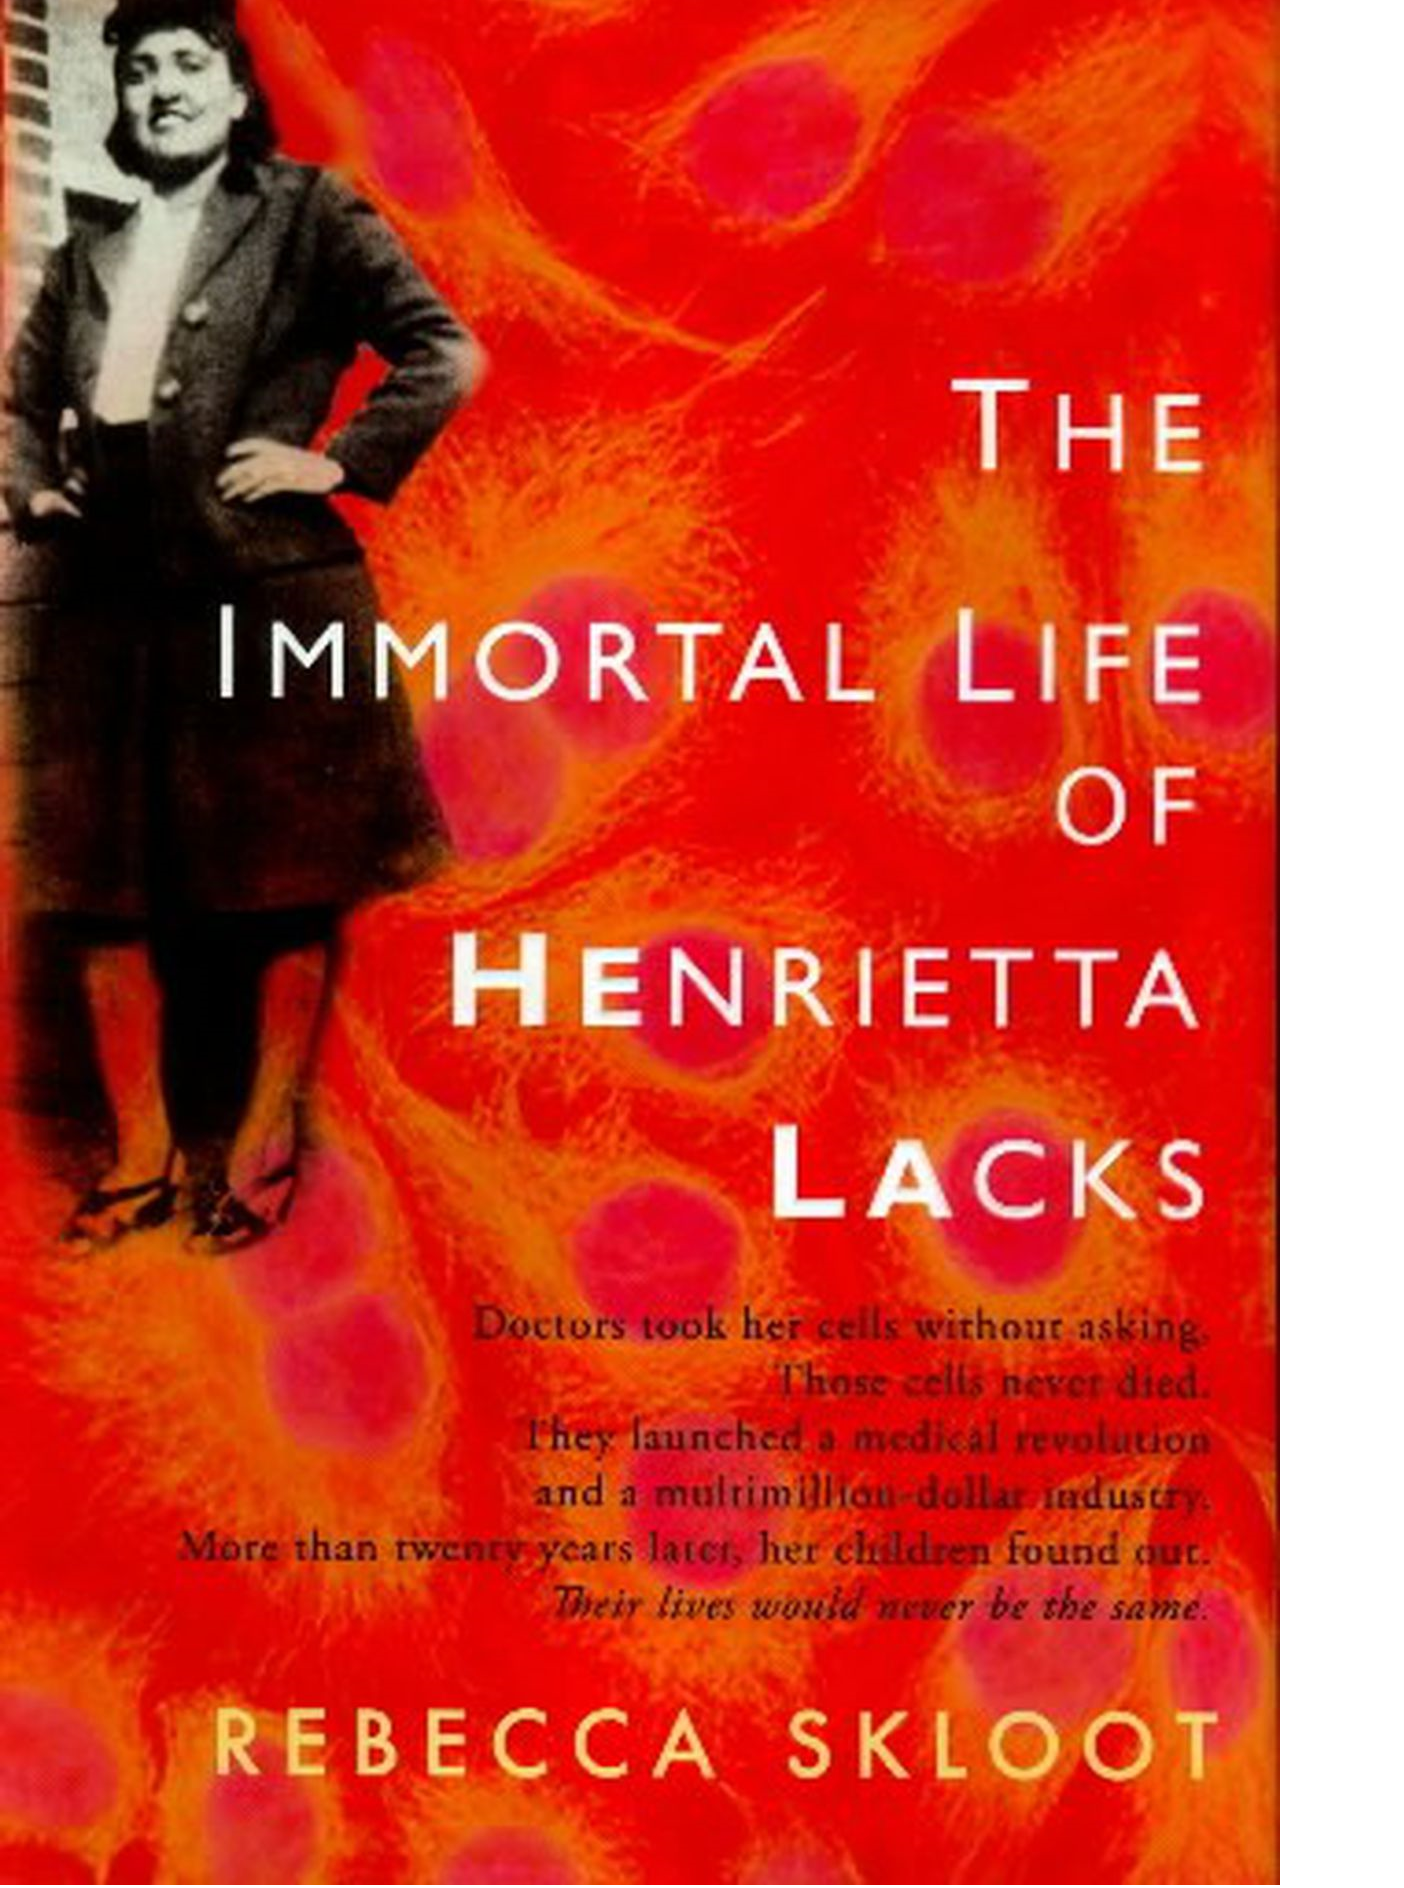 book review on the immortal life of henrietta lacks